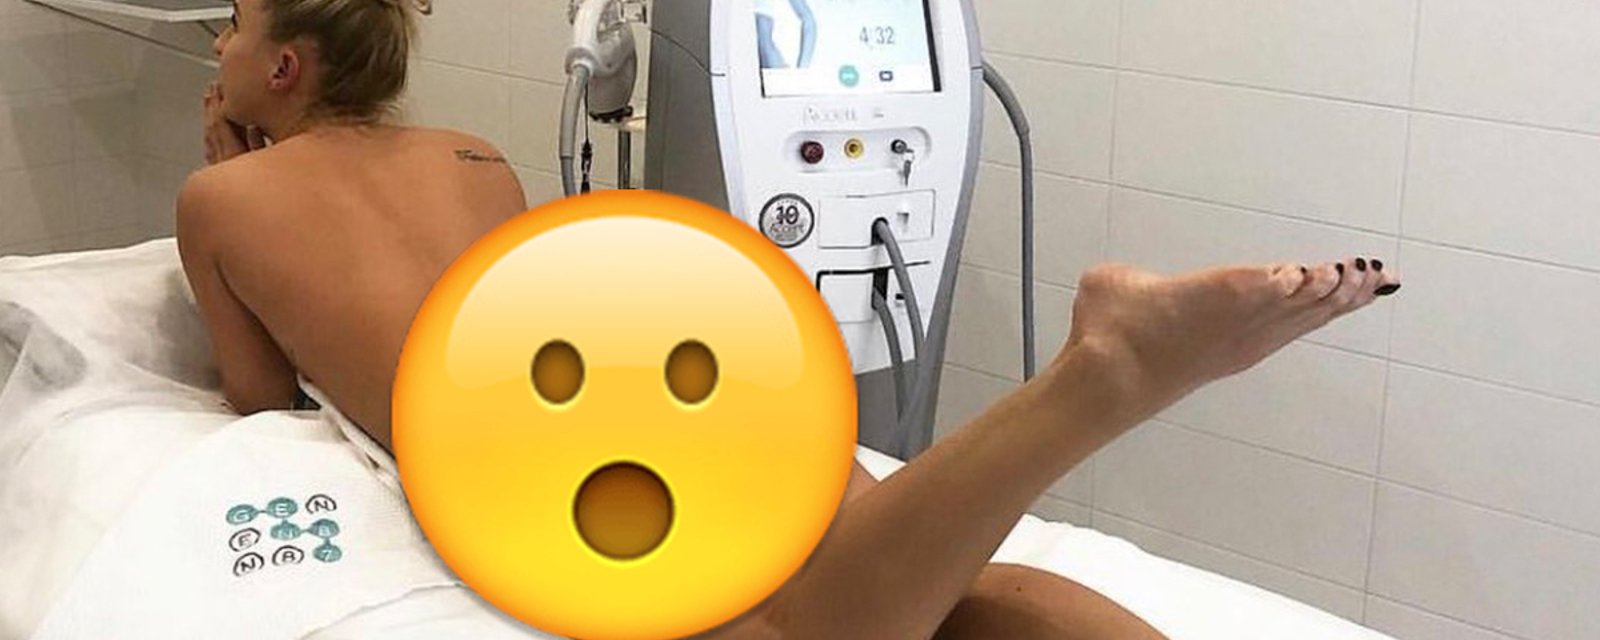 Russian women’s player announces ankle injury with NSFW photo